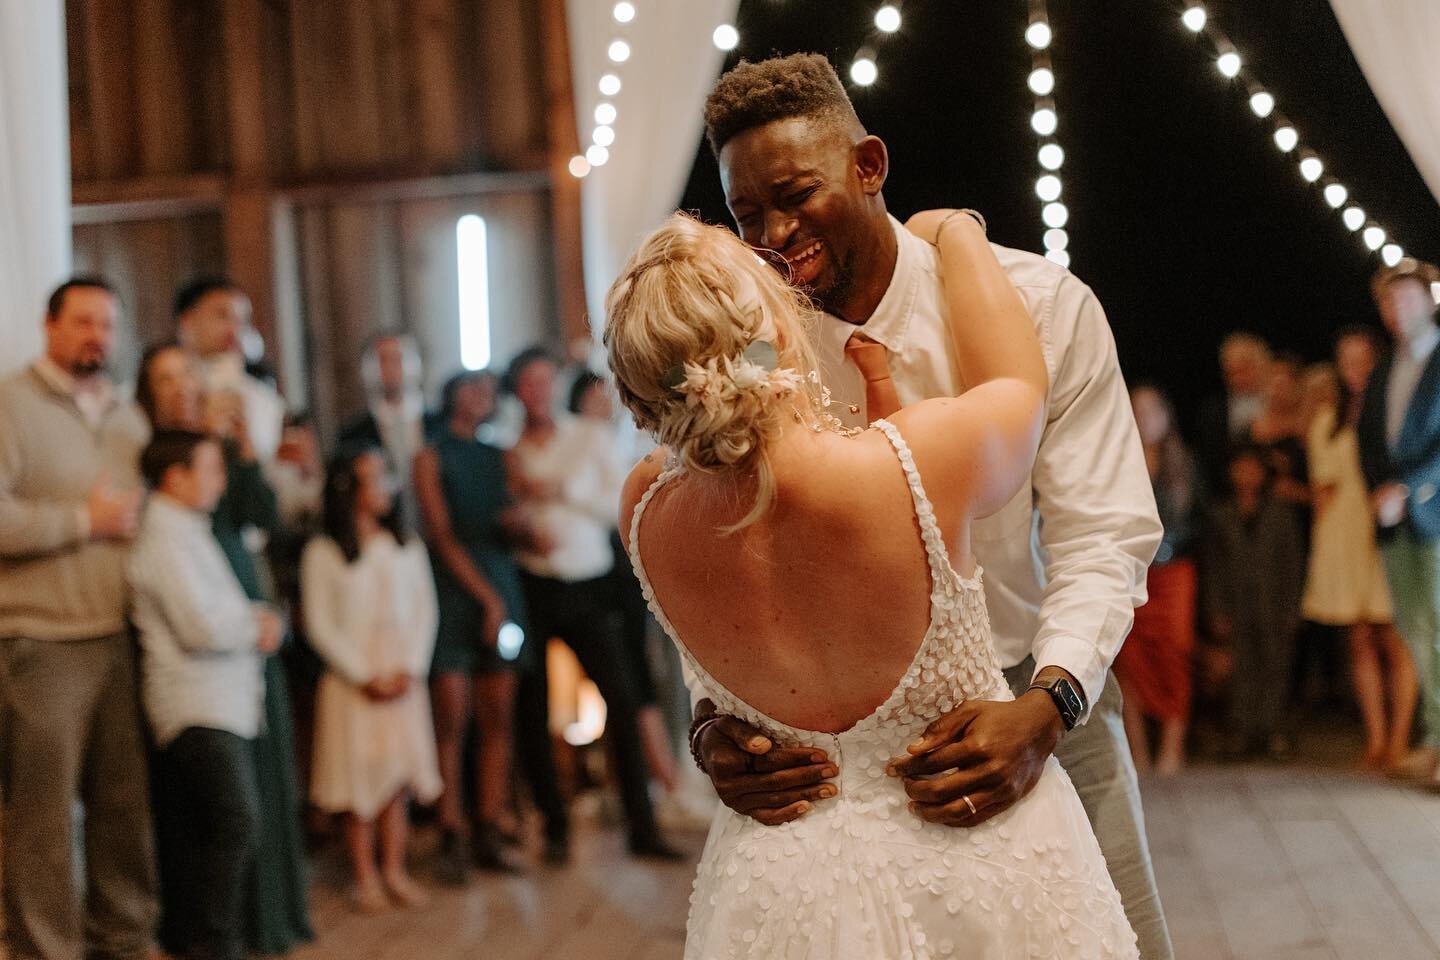 One of my absolute favorite parts of this job is seeing what. a. blast. these couples have dancing together on their wedding day. Look at these two - how can you see this and NOT smile? ✨

📸 @hollyshankland

#wedding #firstdance #weddingdance #dance